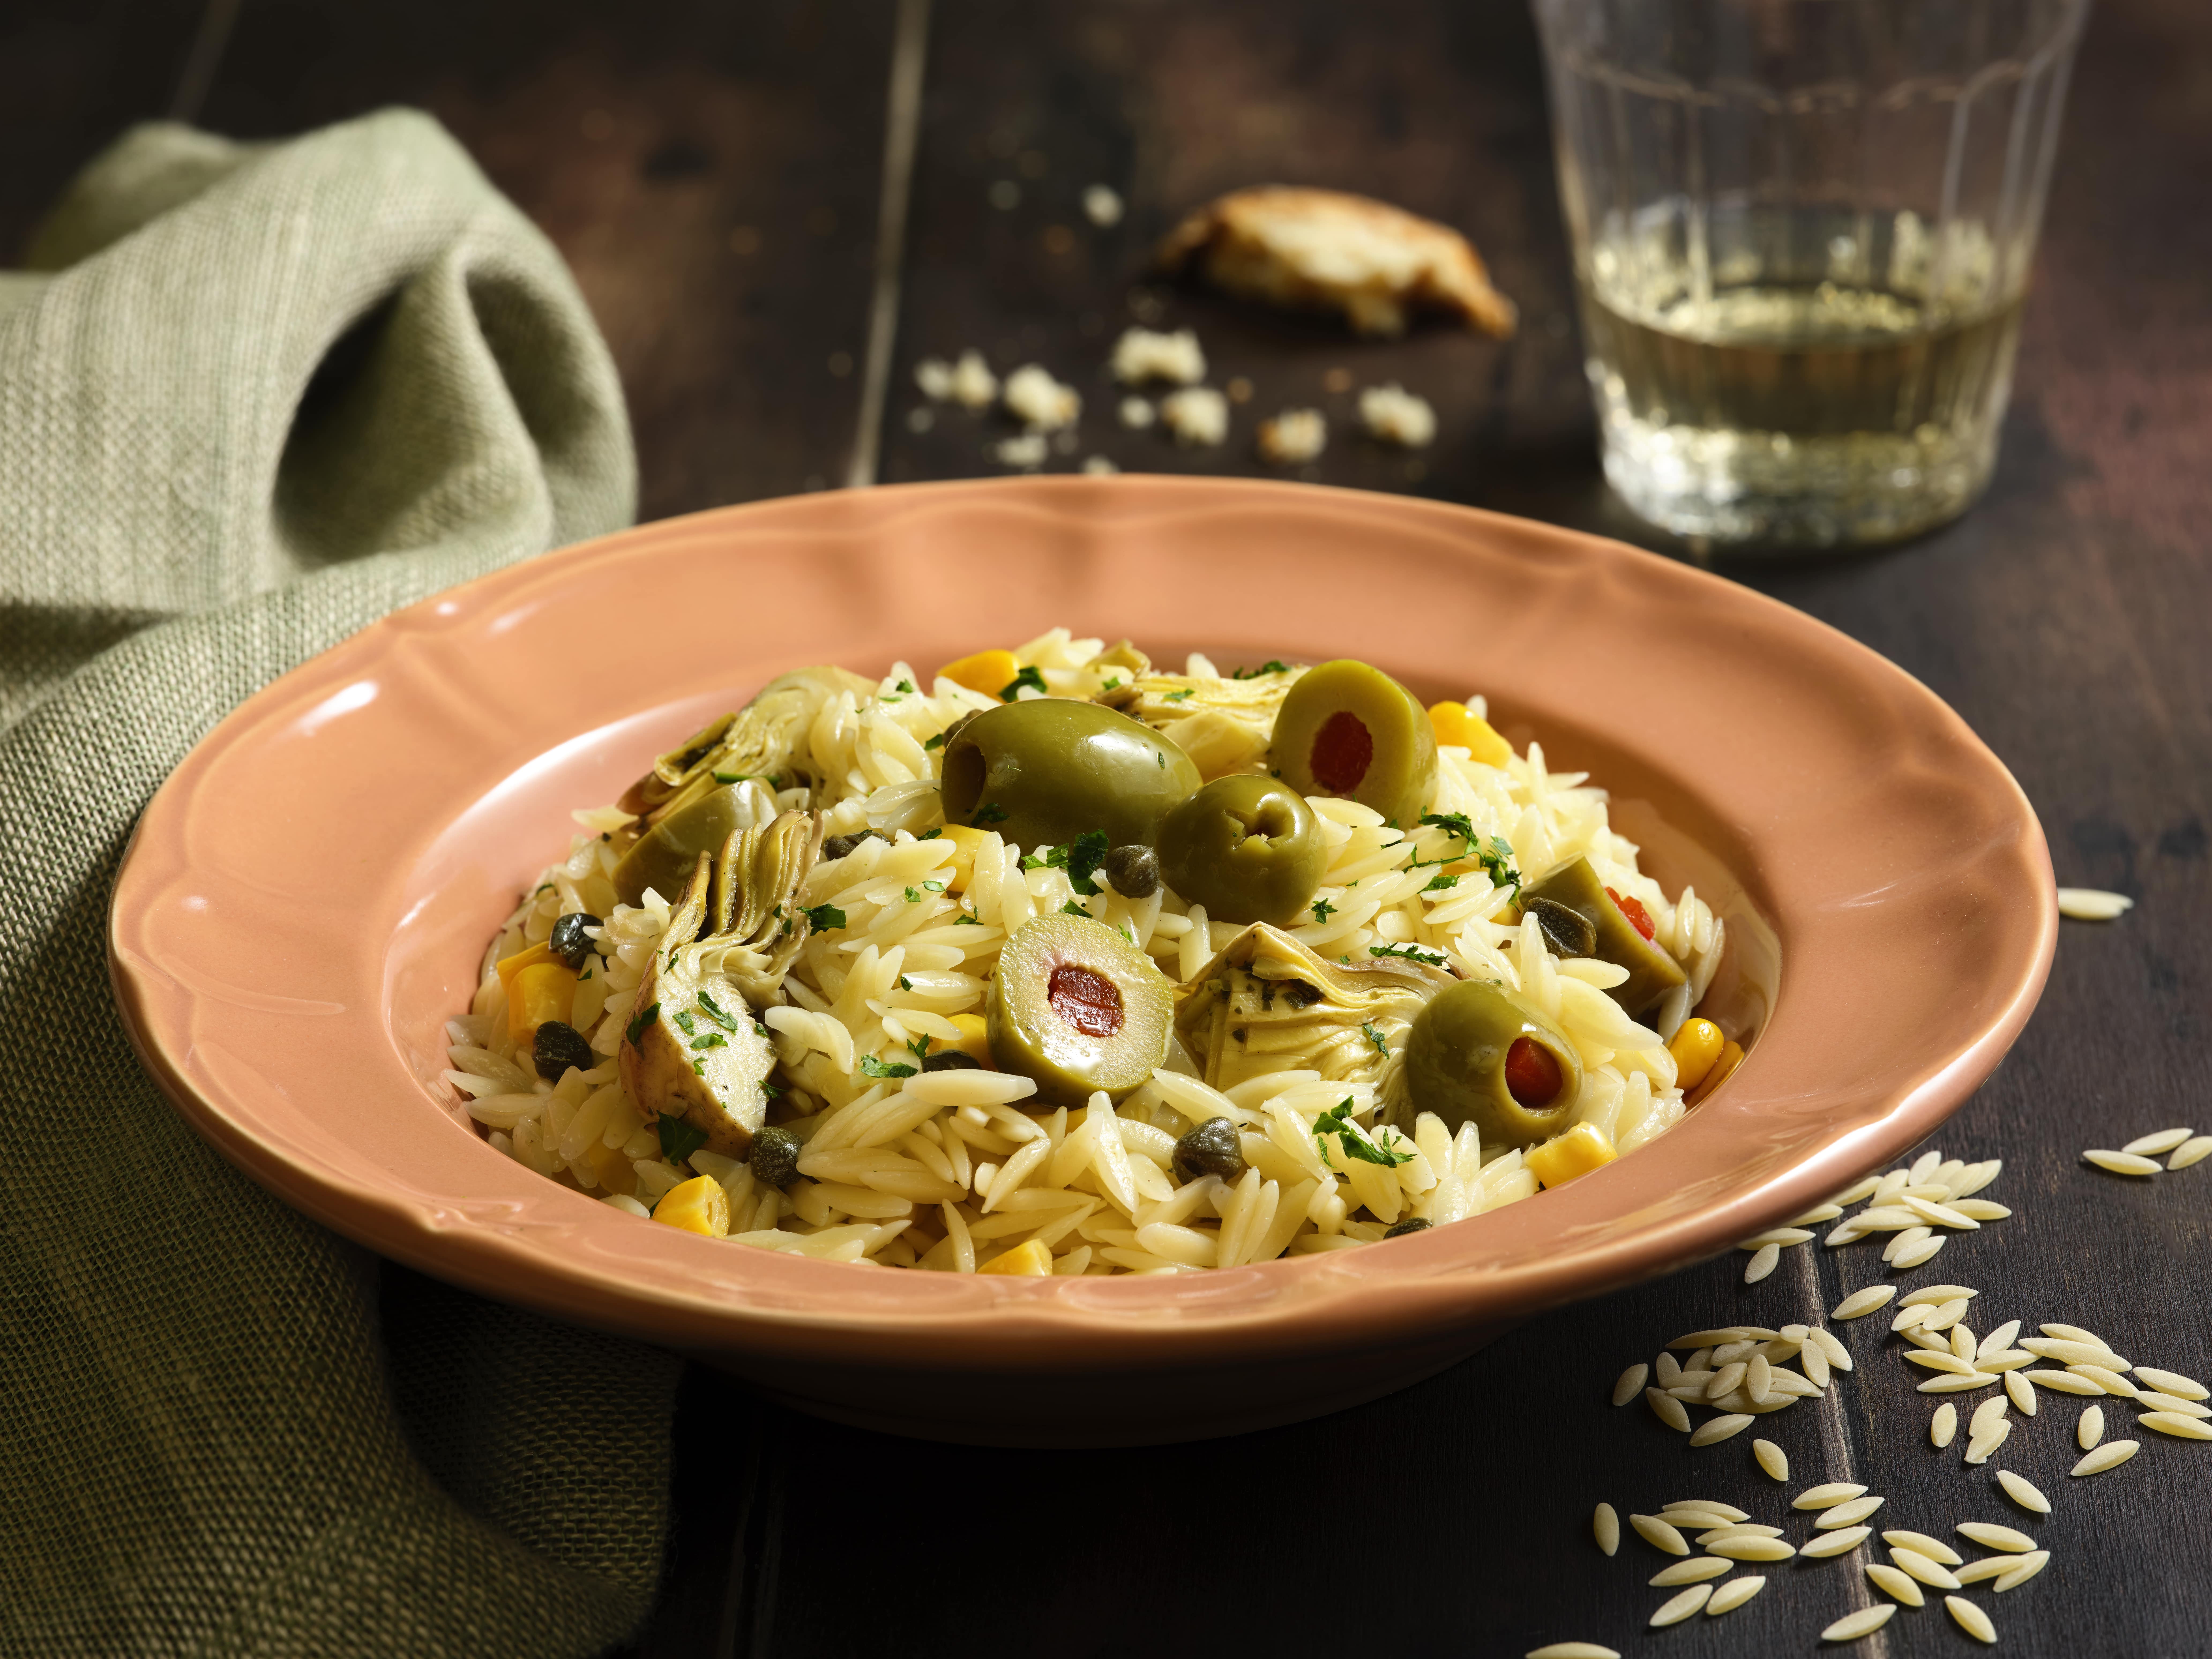 Orzo pasta salad with corn, stuffed olives, cappers, grilled artichokes, herbs